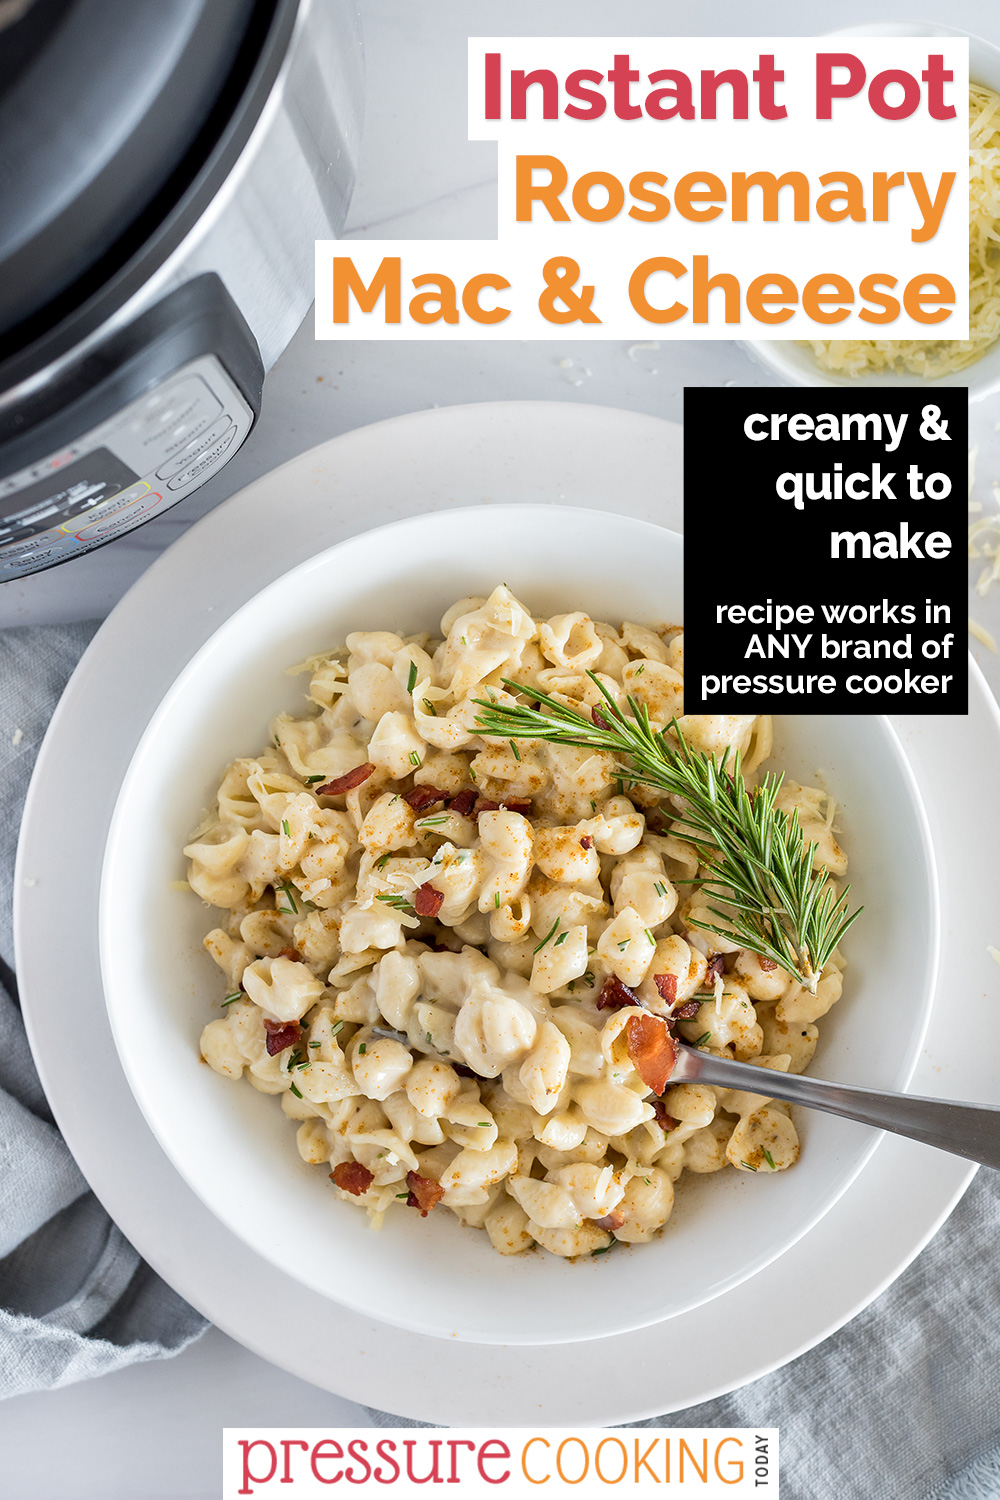 Instant Pot Mac and Cheese made with rosemary and bacon is an easy meal for grown-up tastes with Gruyere cheese, fresh herbs, and bacon on top. Plus your kids will love it too! via @PressureCook2da